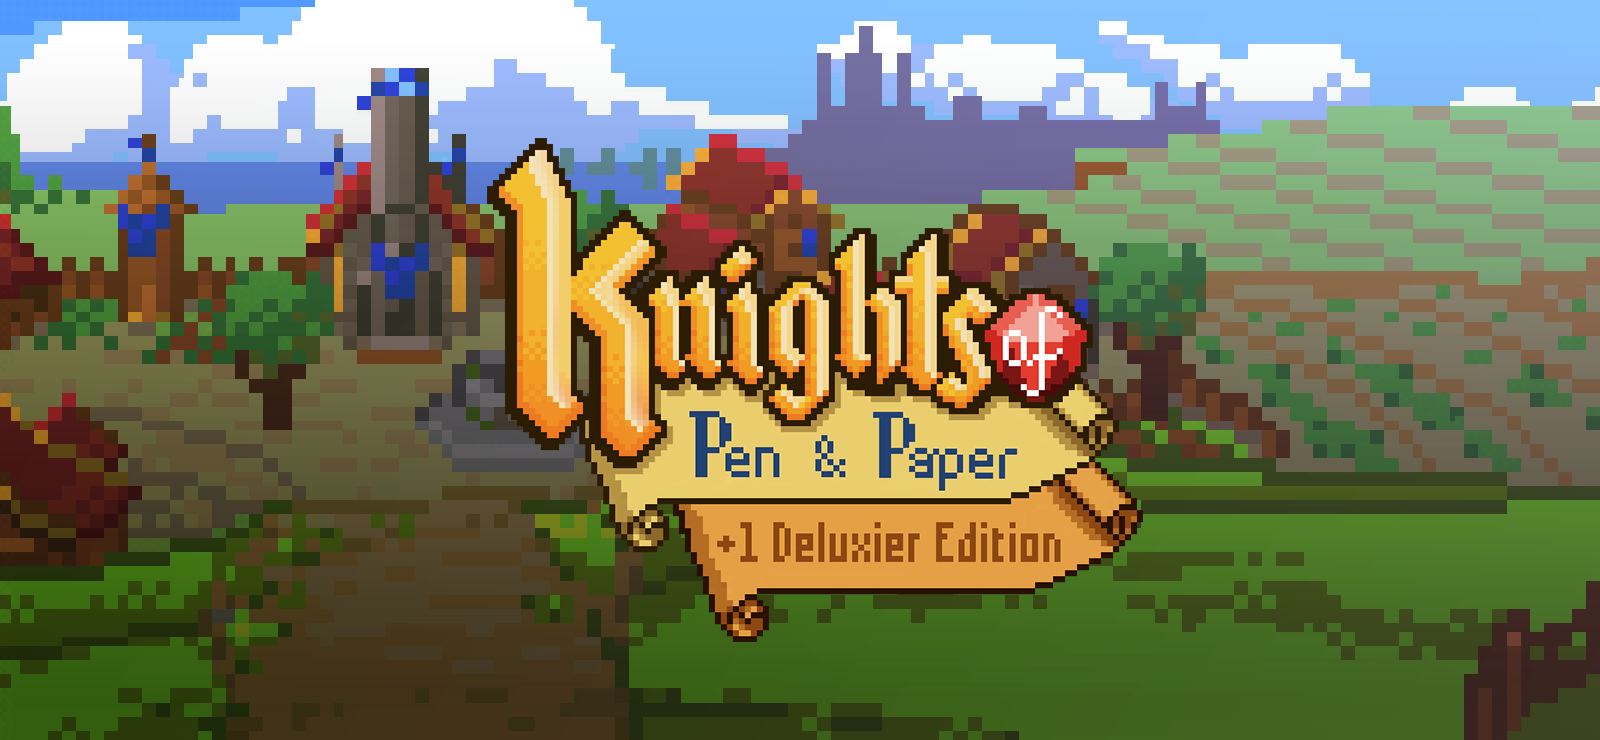 Knights Of Pen And Paper +1 Deluxier Edition